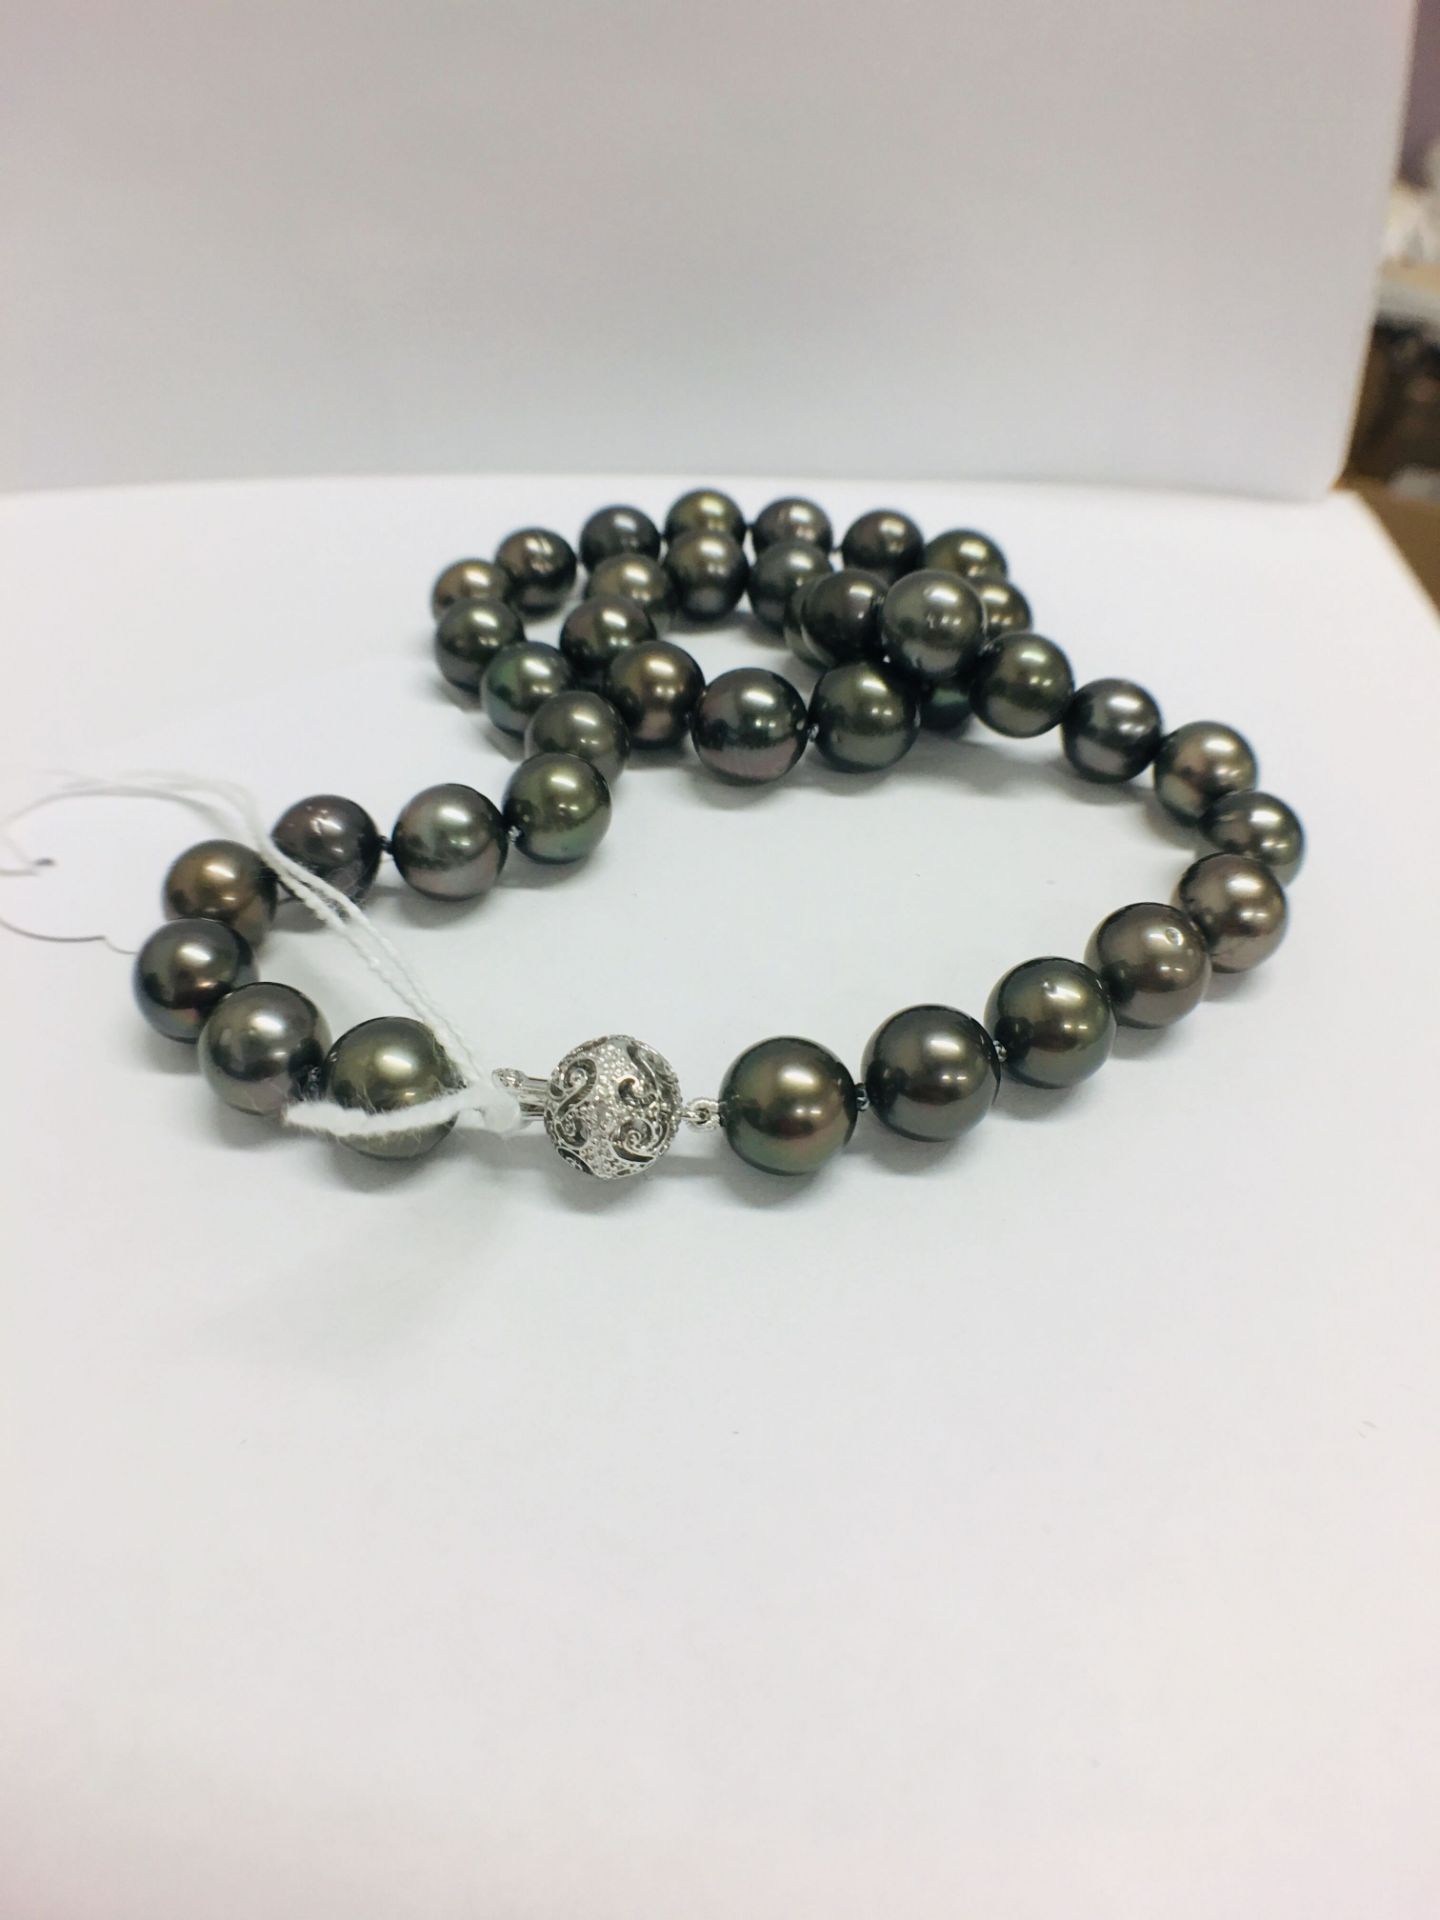 Tahitian Pearl Necklace - Image 4 of 6